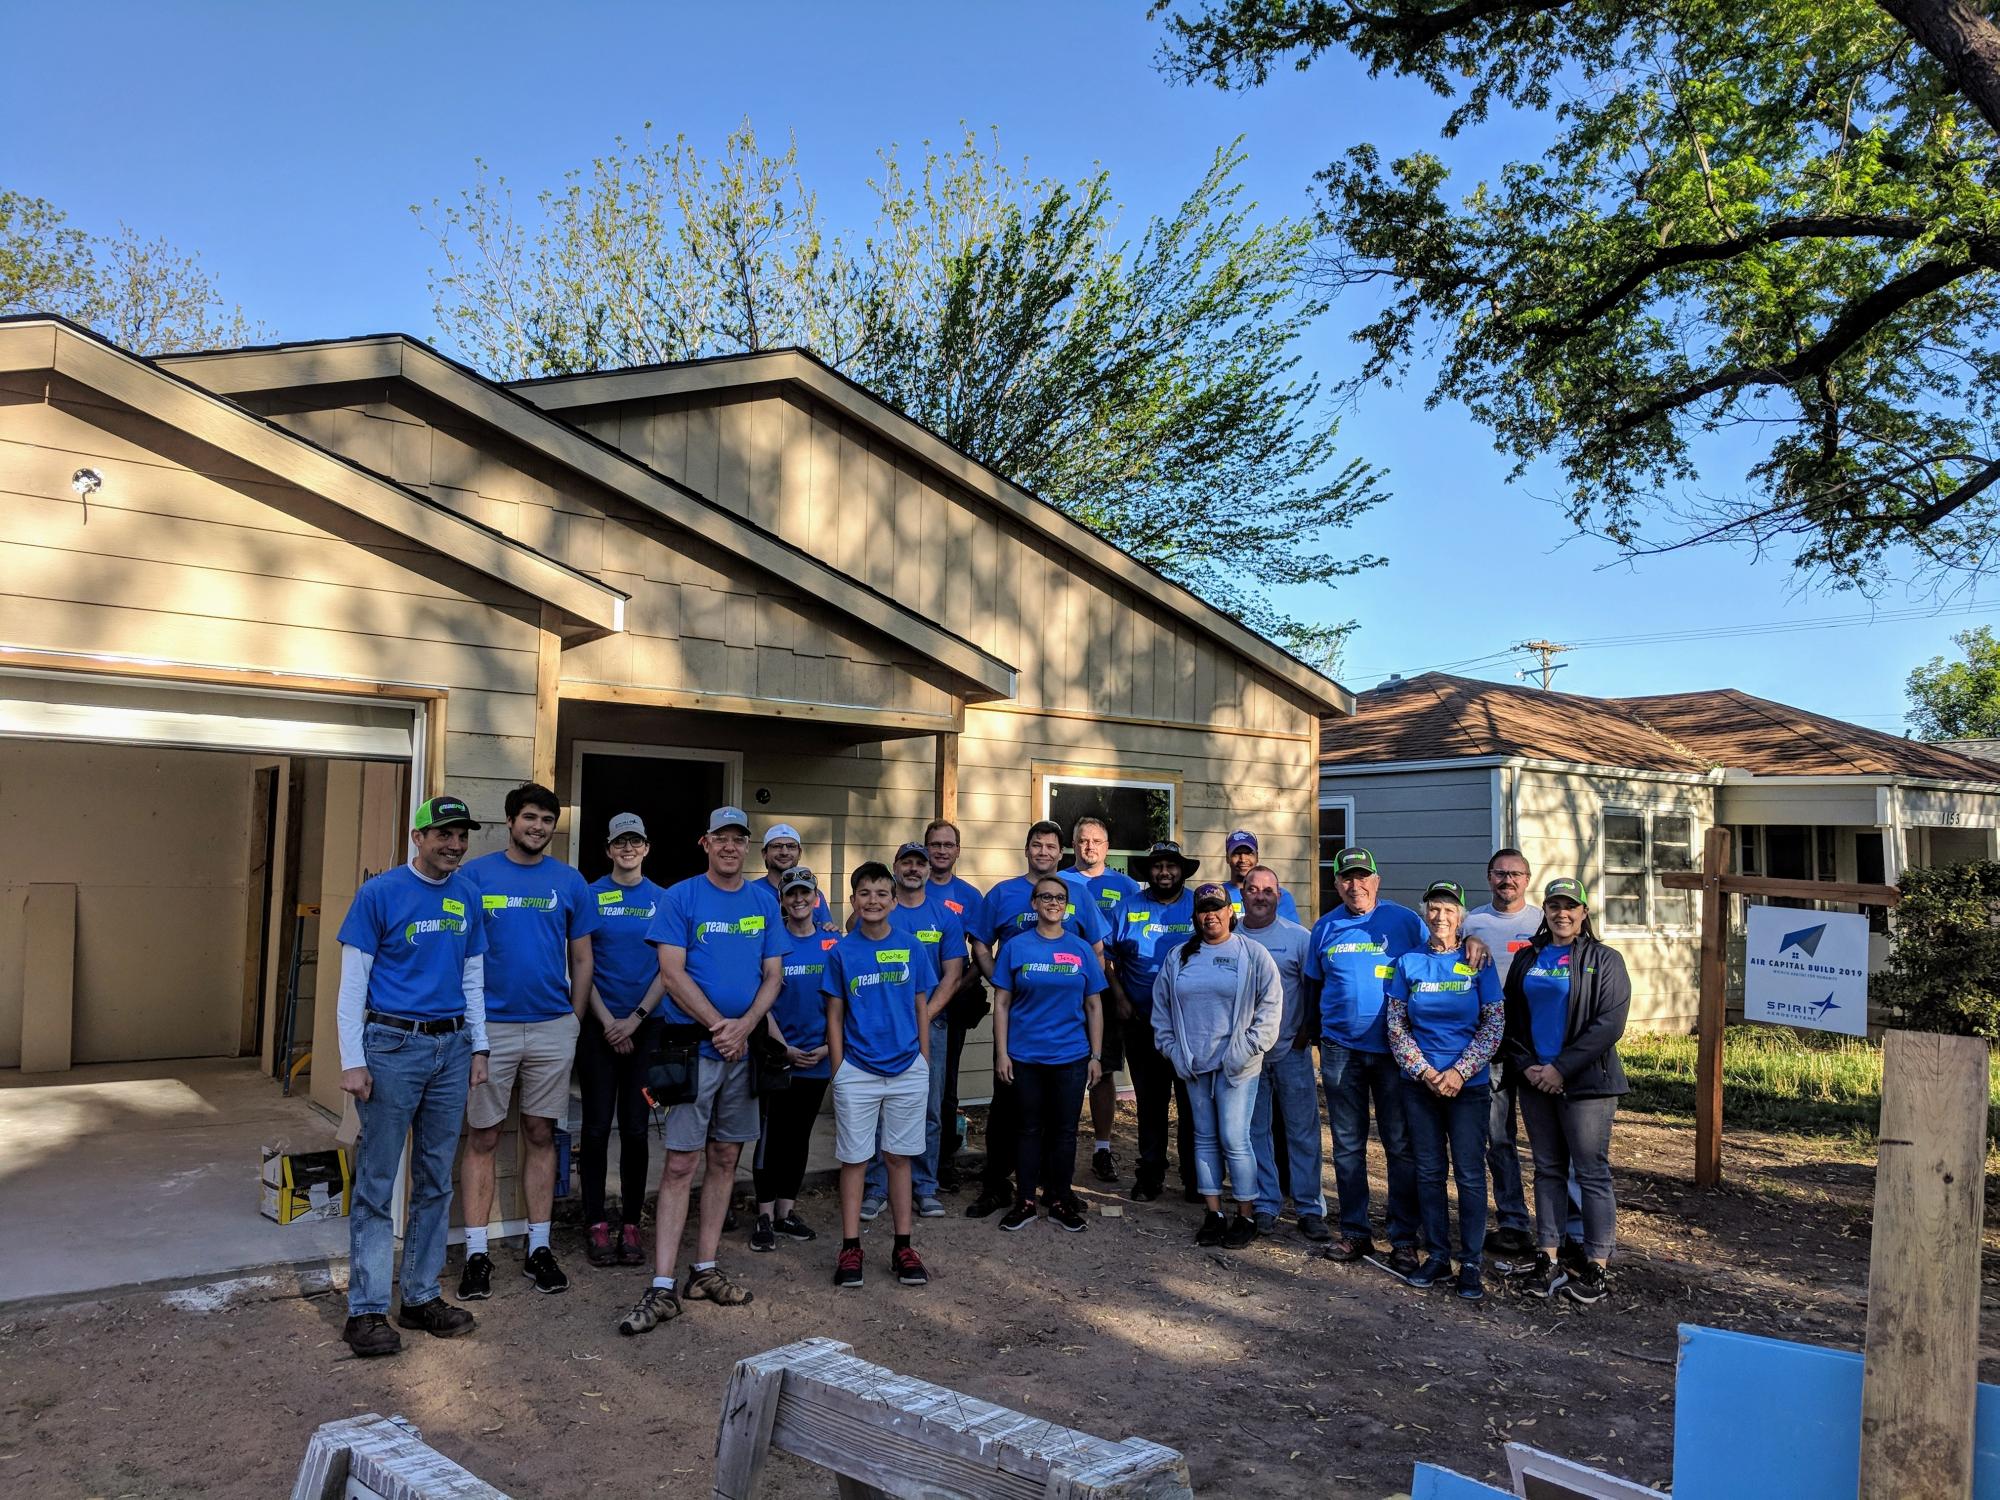 Spirit AeroSystems of Wichita Kansas pose with Tom Gentile and fellow employees at the Habitat for Humanity Air Capital Build in 2019